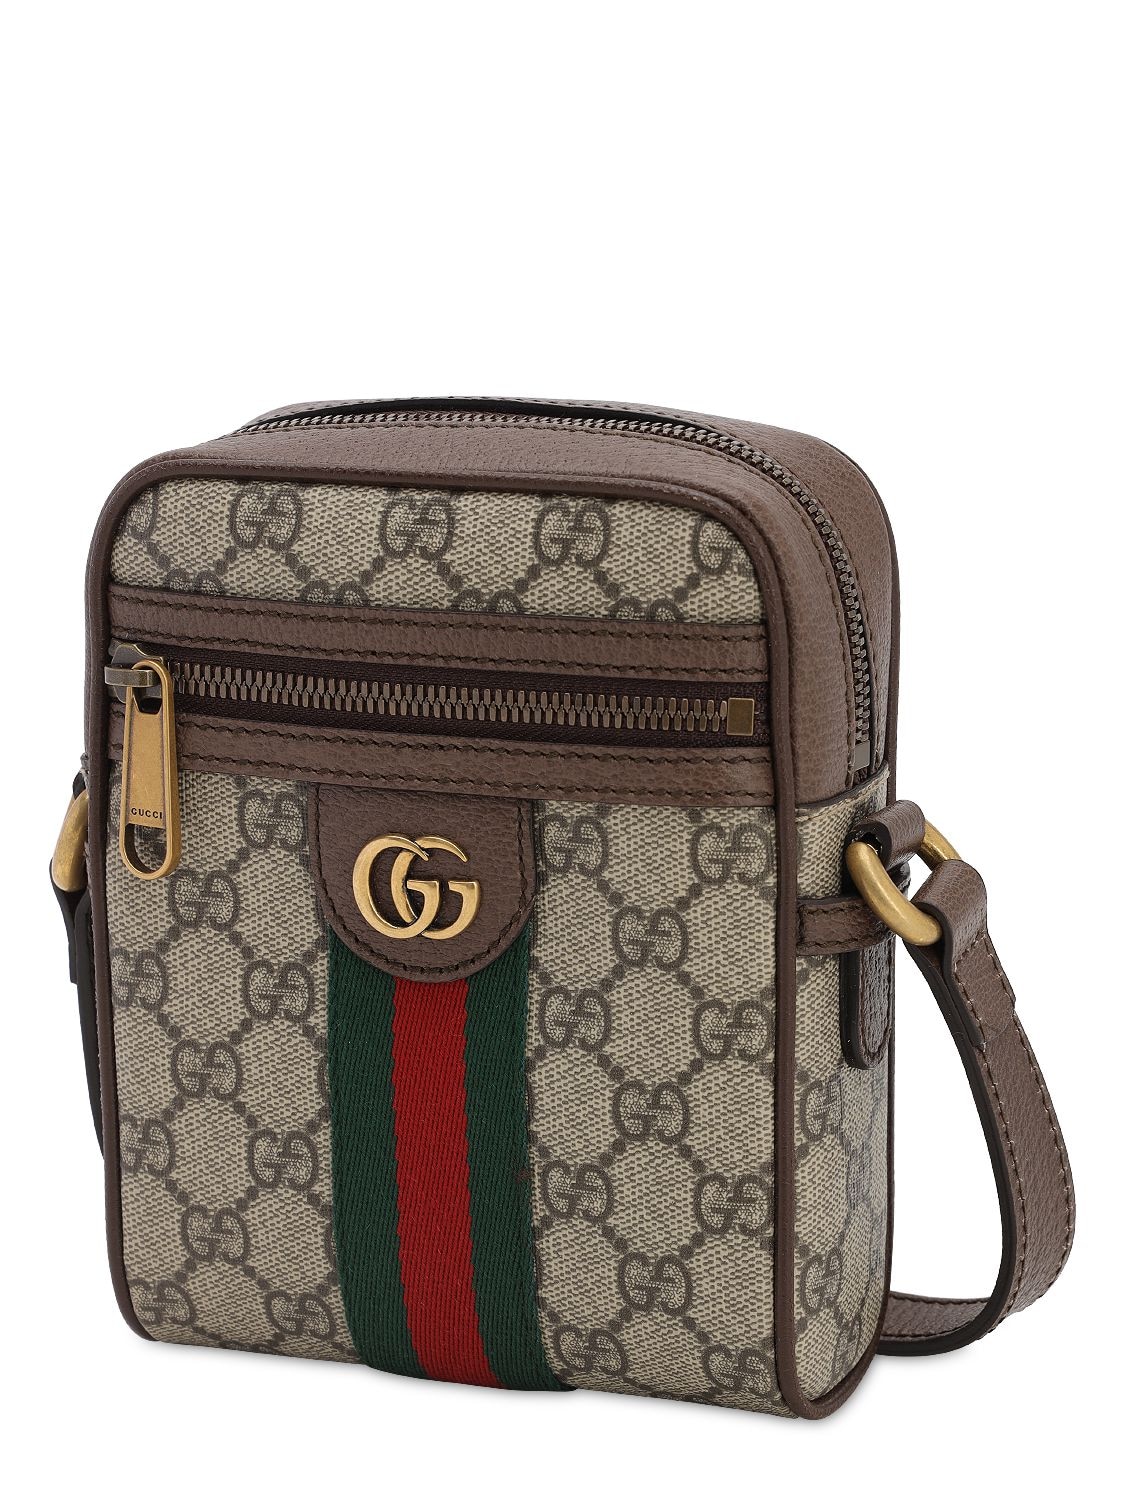 Gucci Ophidia Gg Supreme Leather-trim Cross-body Bag In Beige | ModeSens